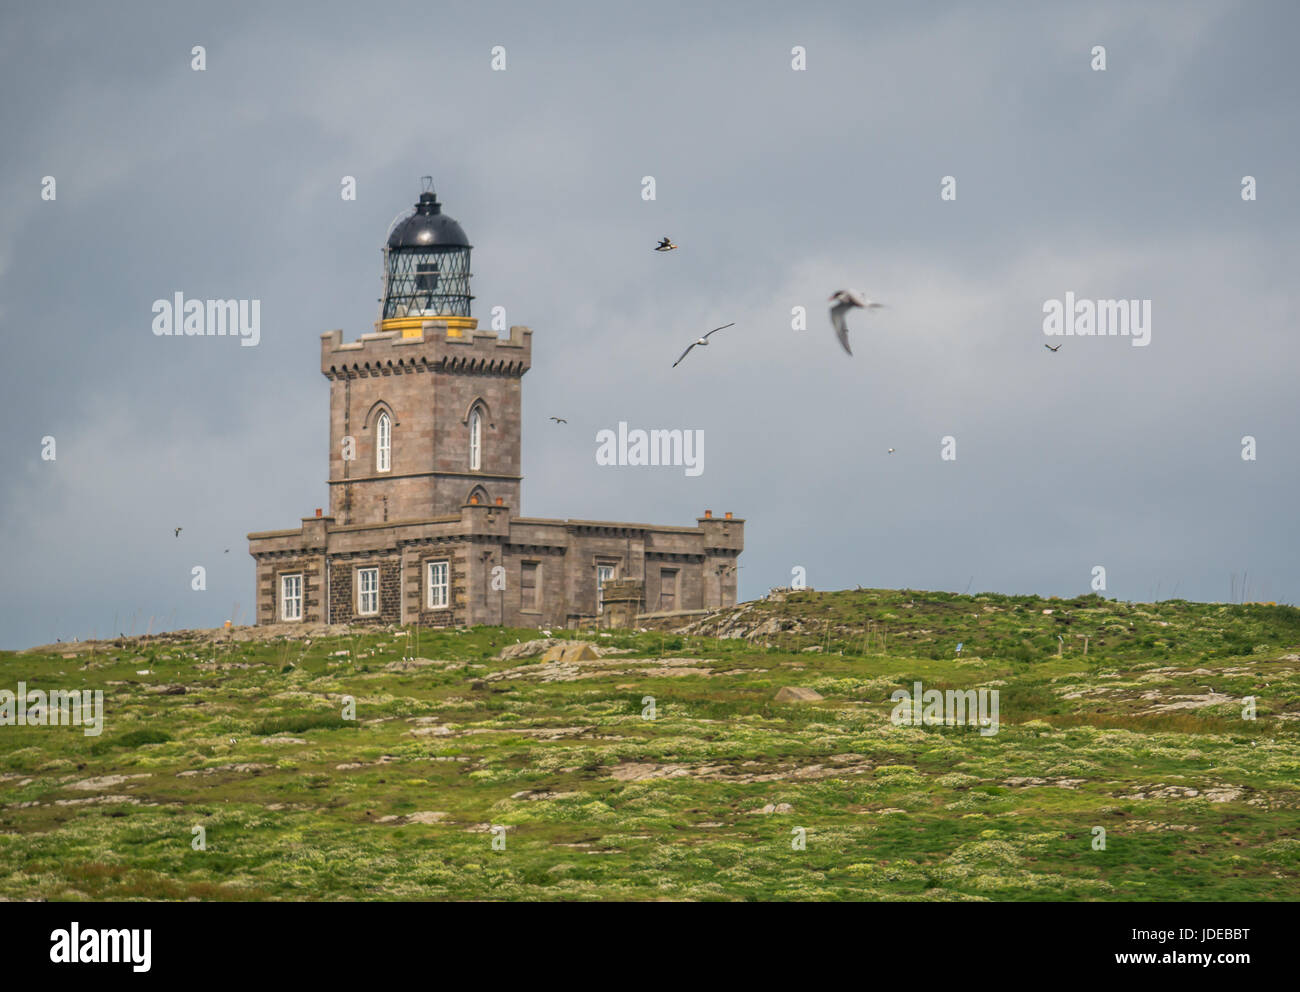 Isle of May lighthouse built by Robert Stevenson, Northern Lighthouse Board with seabirds flying around, Scotland, UK Stock Photo